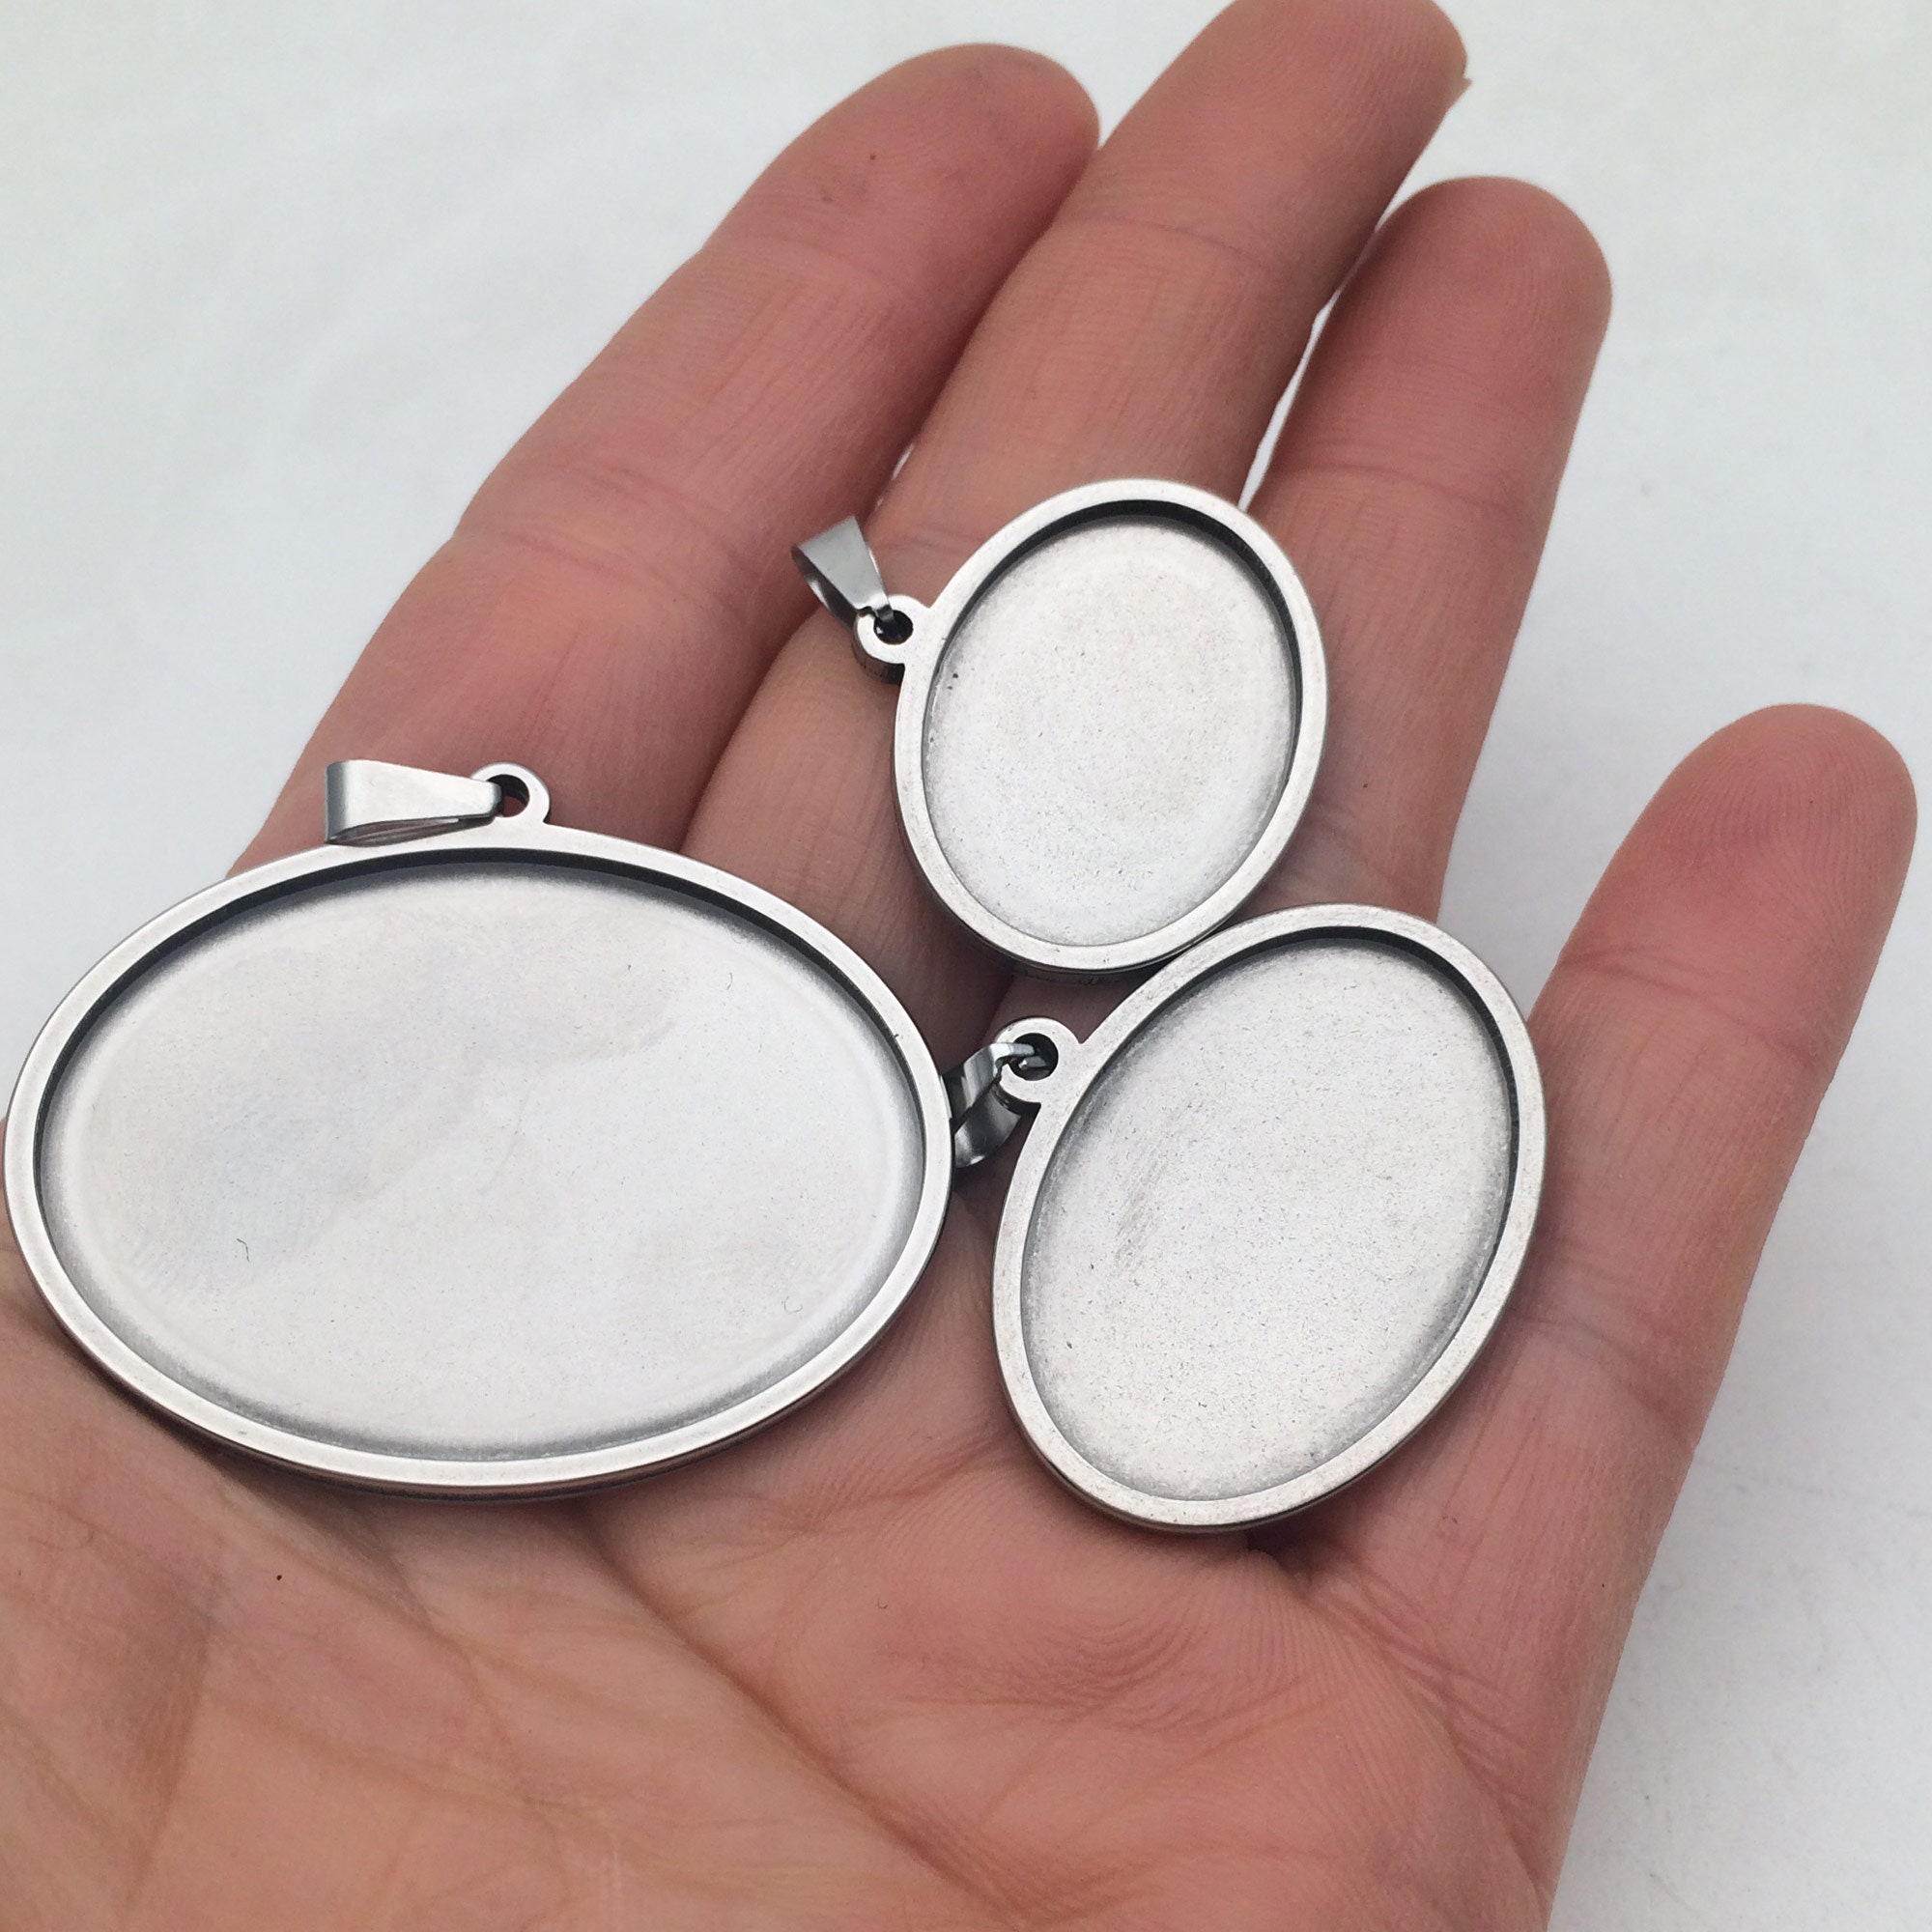 16 Pieces Bezel Pendant Trays, 18x25mm Oval Pendant Trays Bezels Cabochon  Settings Trays Pendant Blanks for Crafting DIY Jewelry Making - 8 Styles